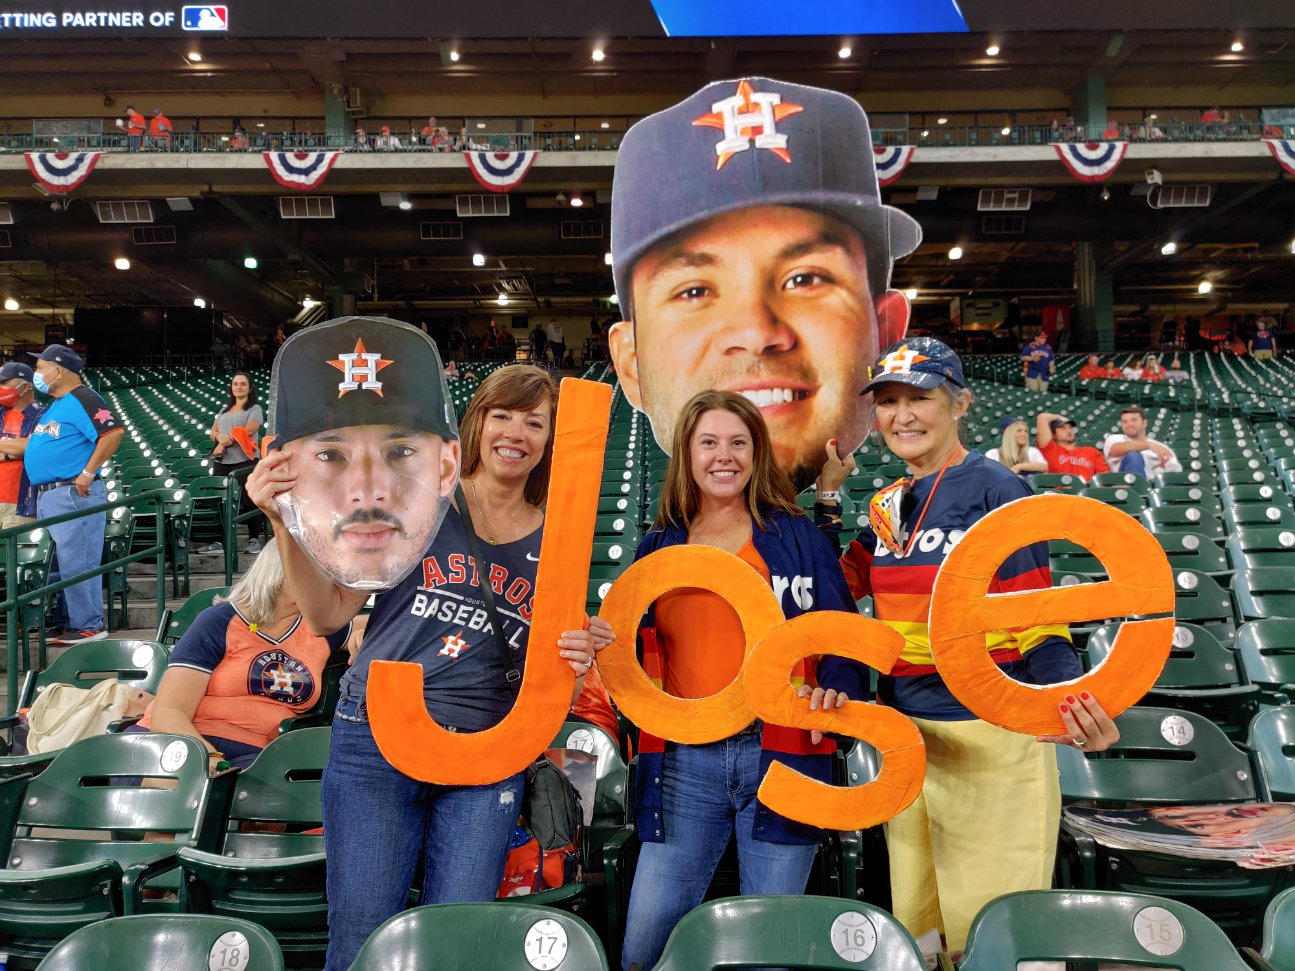 See how excited Houston Astros fans are about the World Series